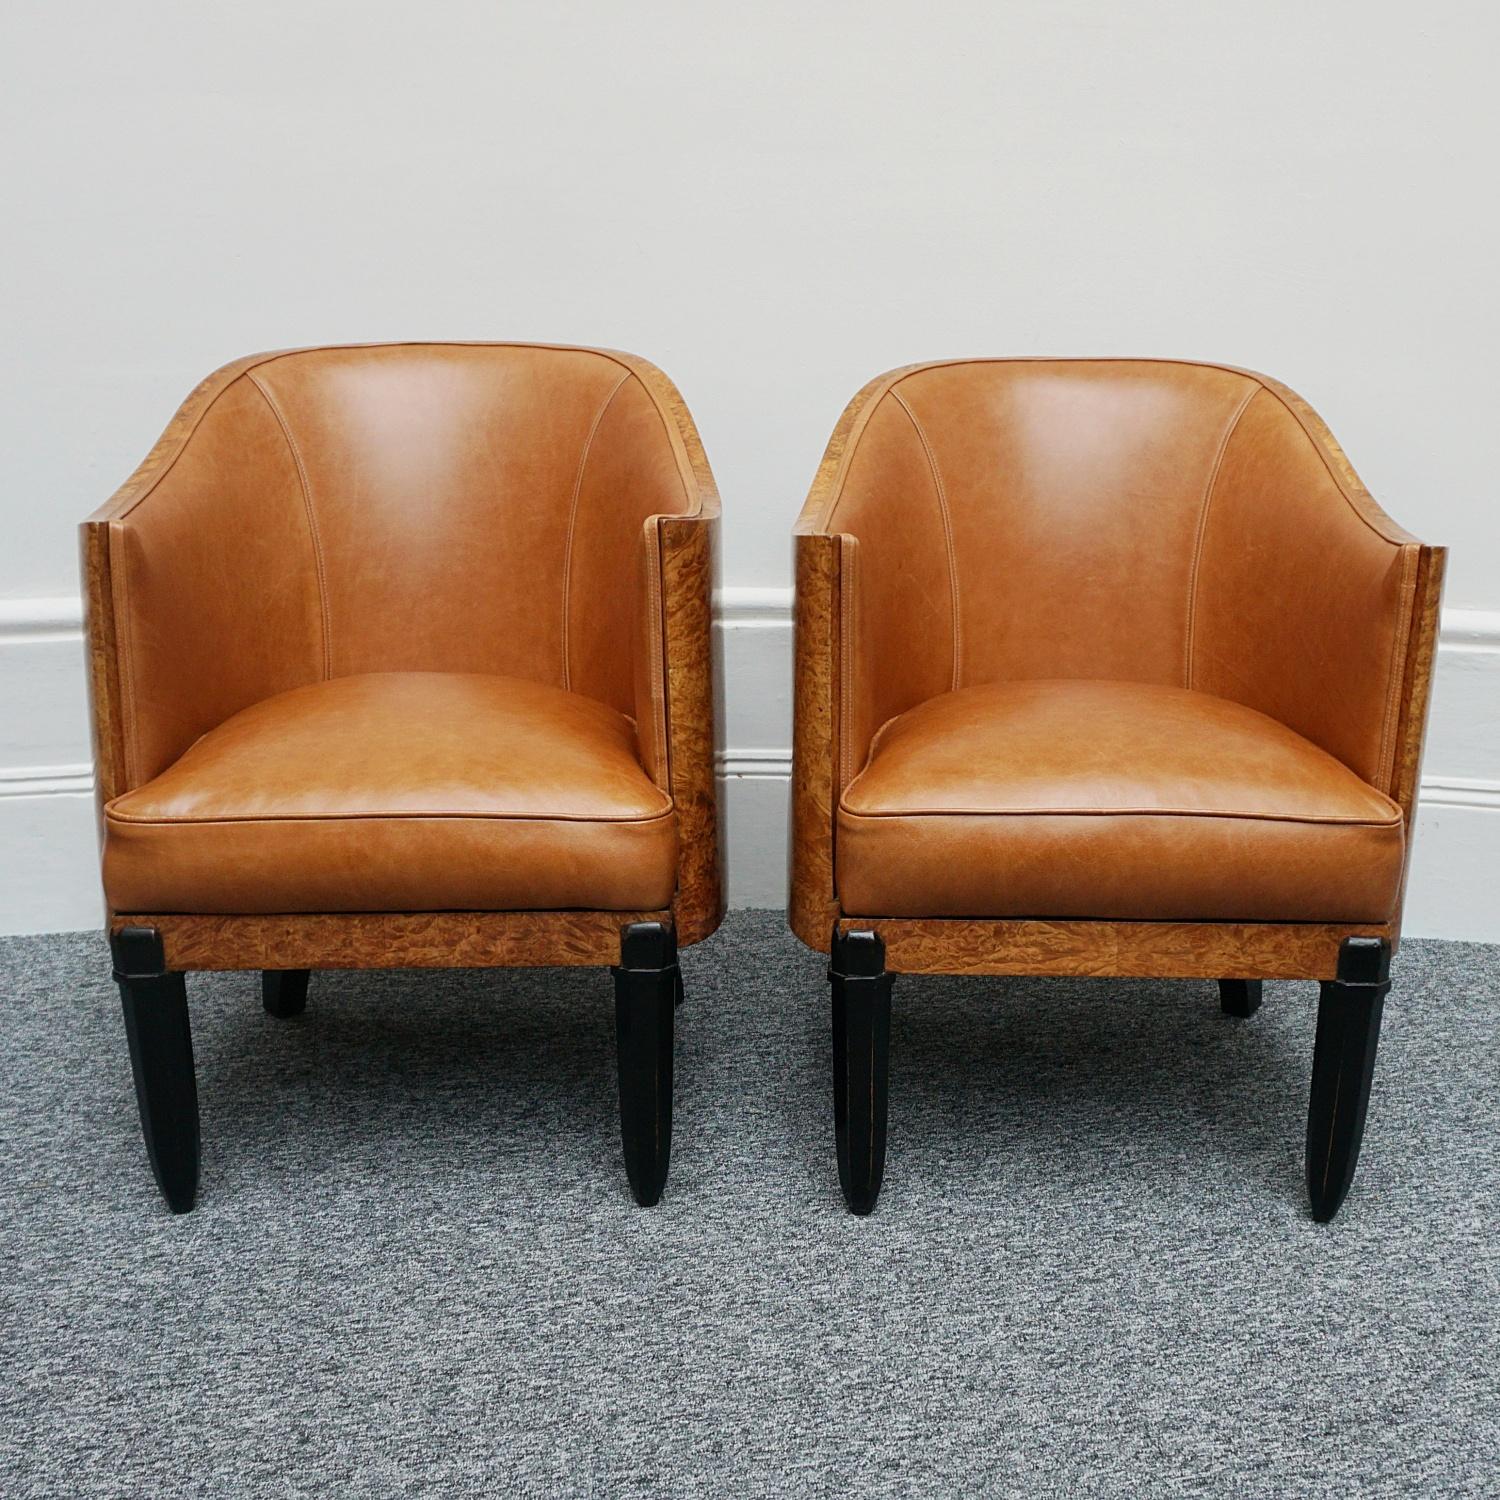 Original Pair of Walnut and Leather Art Deco Club Chairs  8